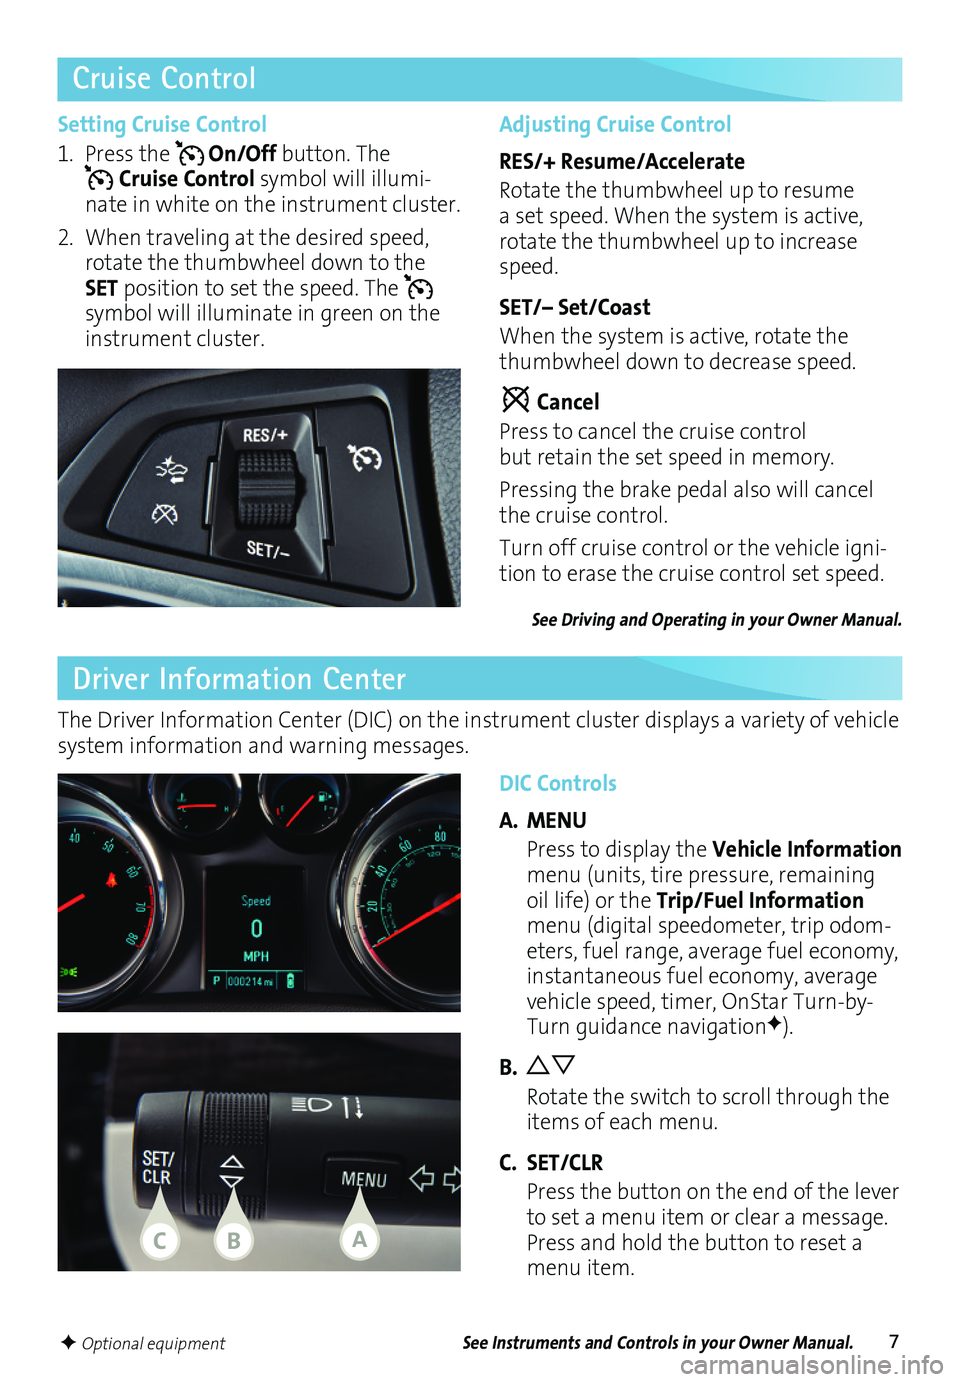 BUICK ENCORE 2016  Get To Know Guide 7
Cruise Control
Driver Information Center
DIC Controls
A. MENU
 Press to display the Vehicle Information menu (units, tire pressure, remaining oil life) or the Trip/Fuel Information menu (digital spe